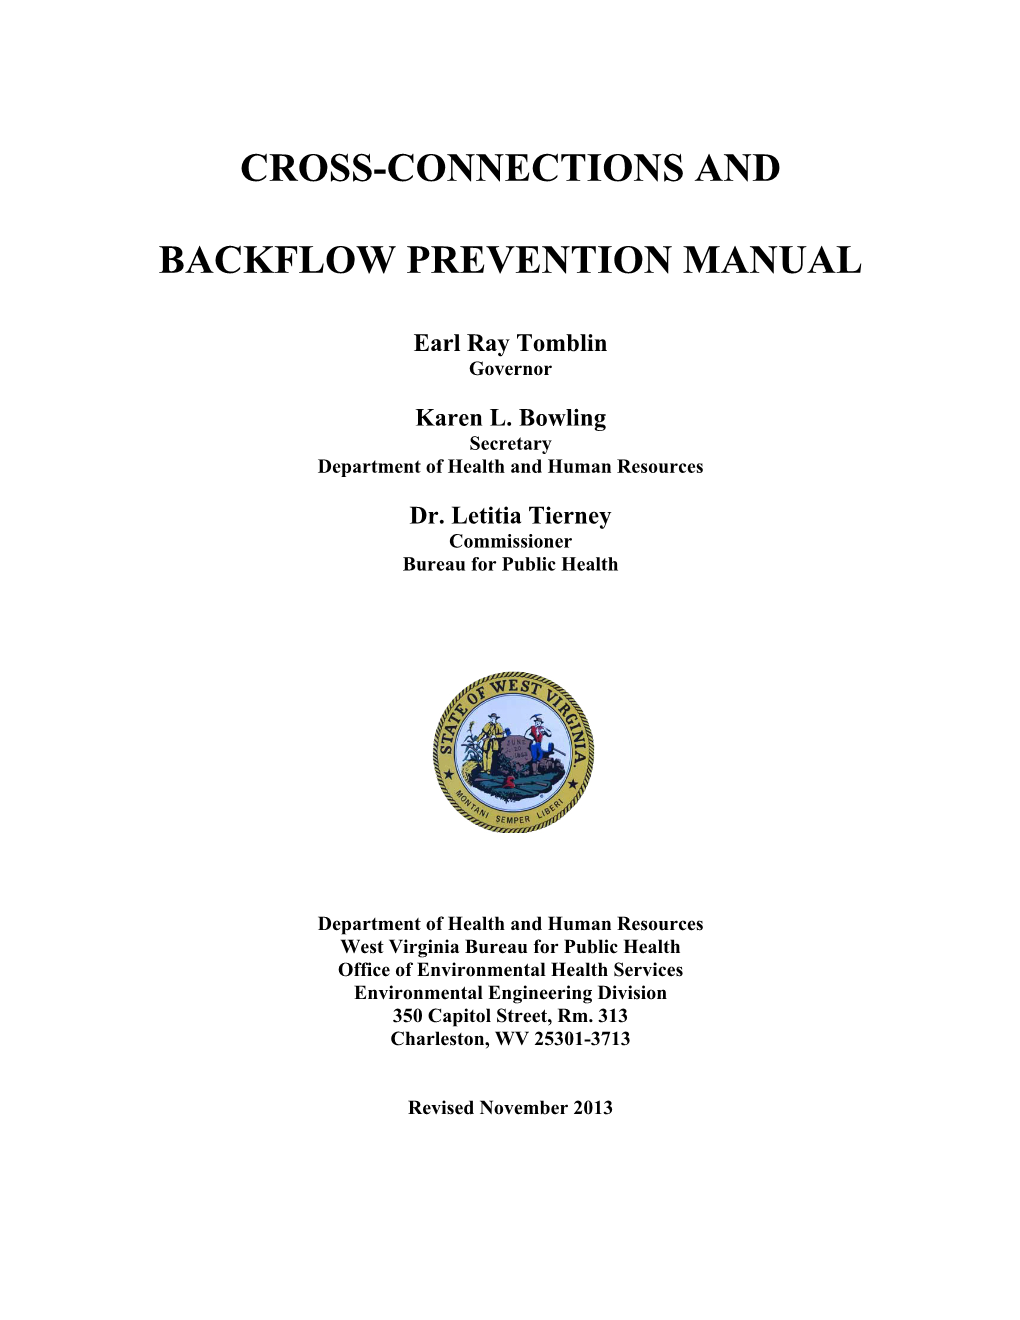 Cross-Connections and Backflow Prevention Manual